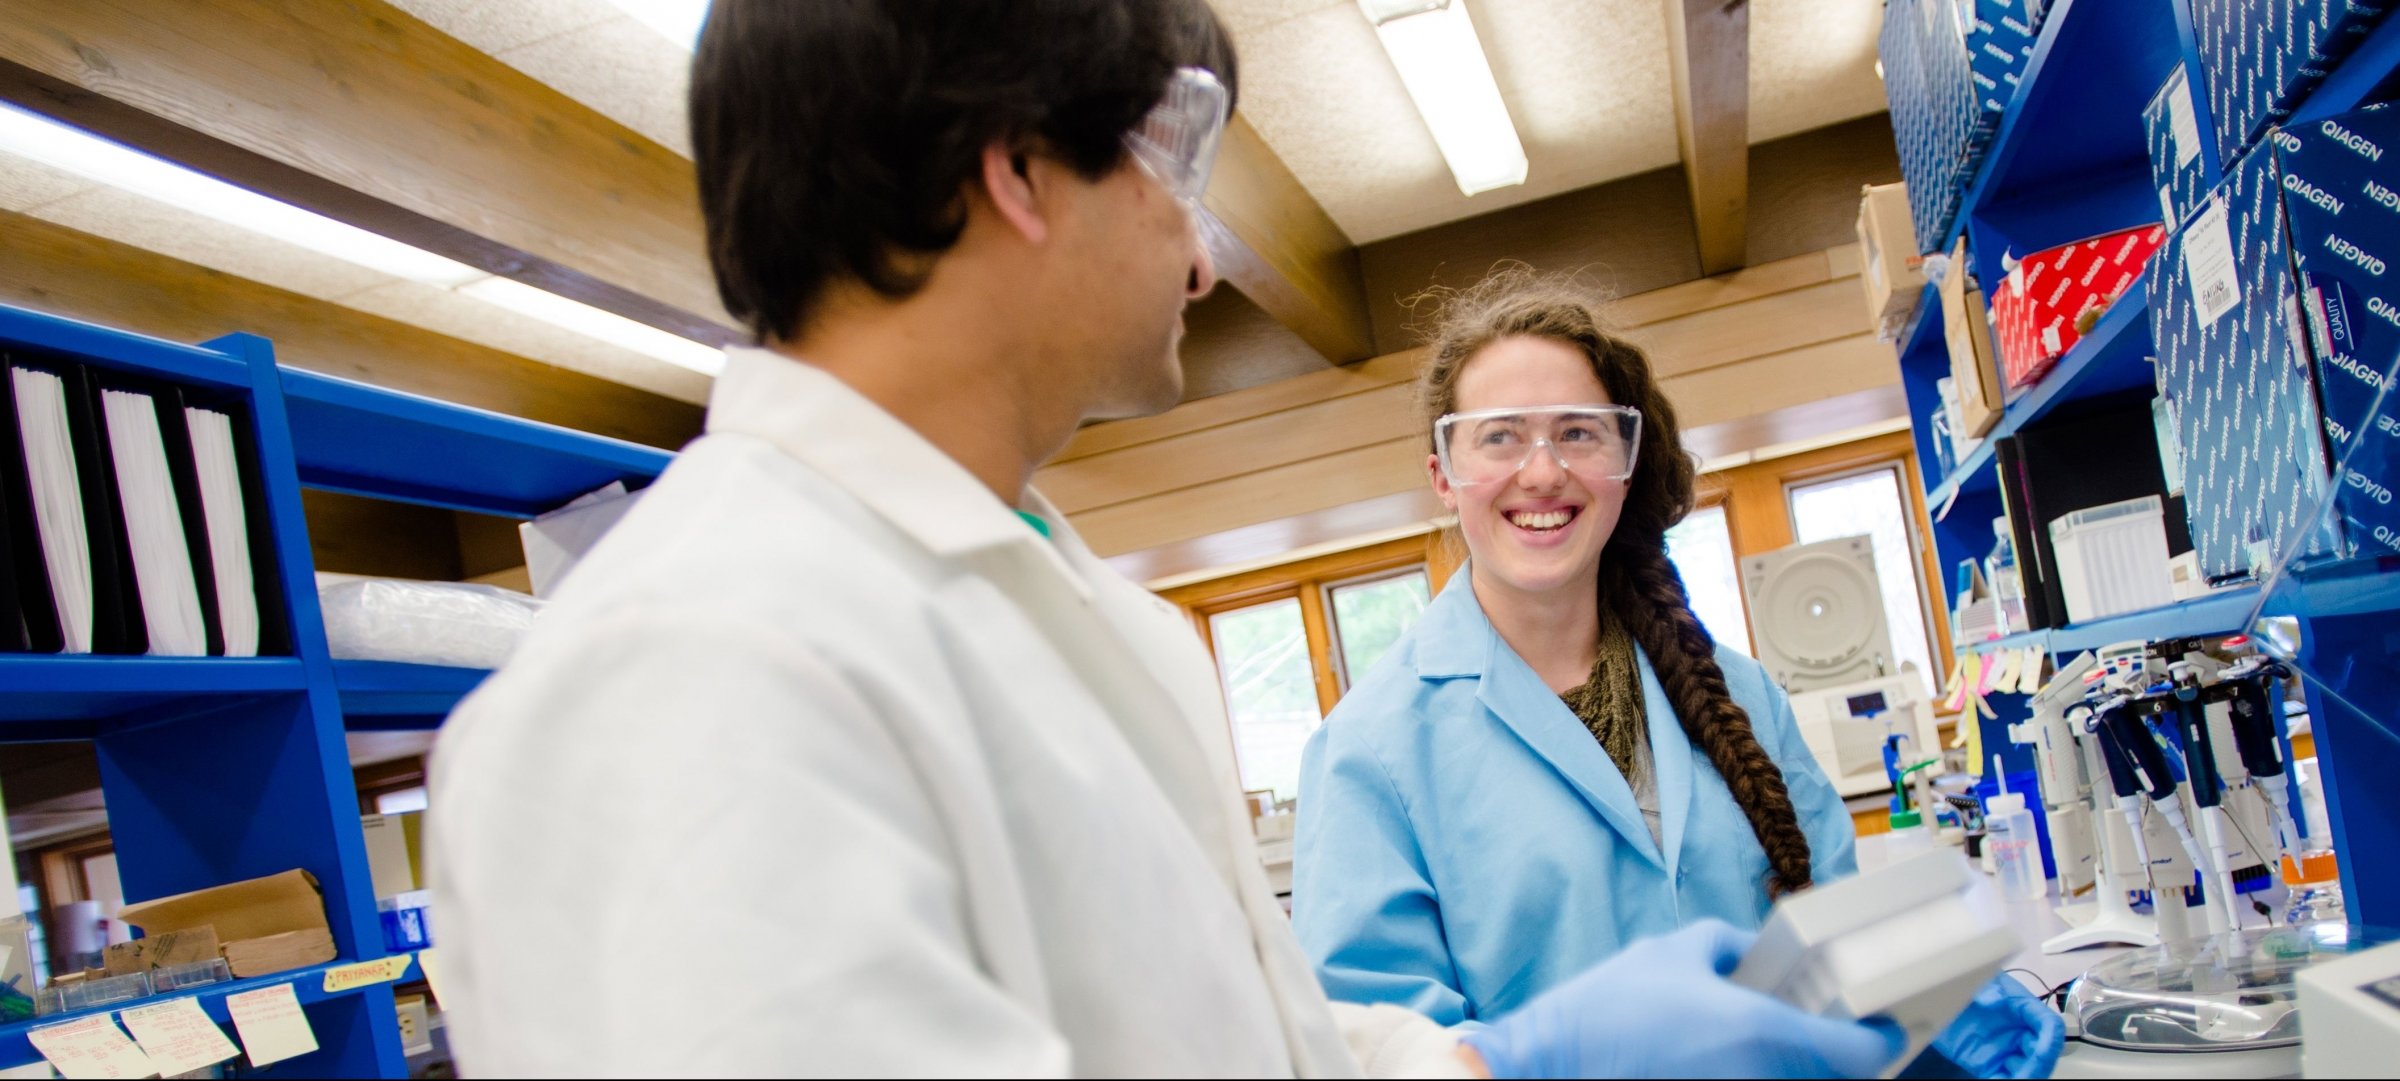 Two graduate students inside a lab with lab coats, gloves, and safety glasses.